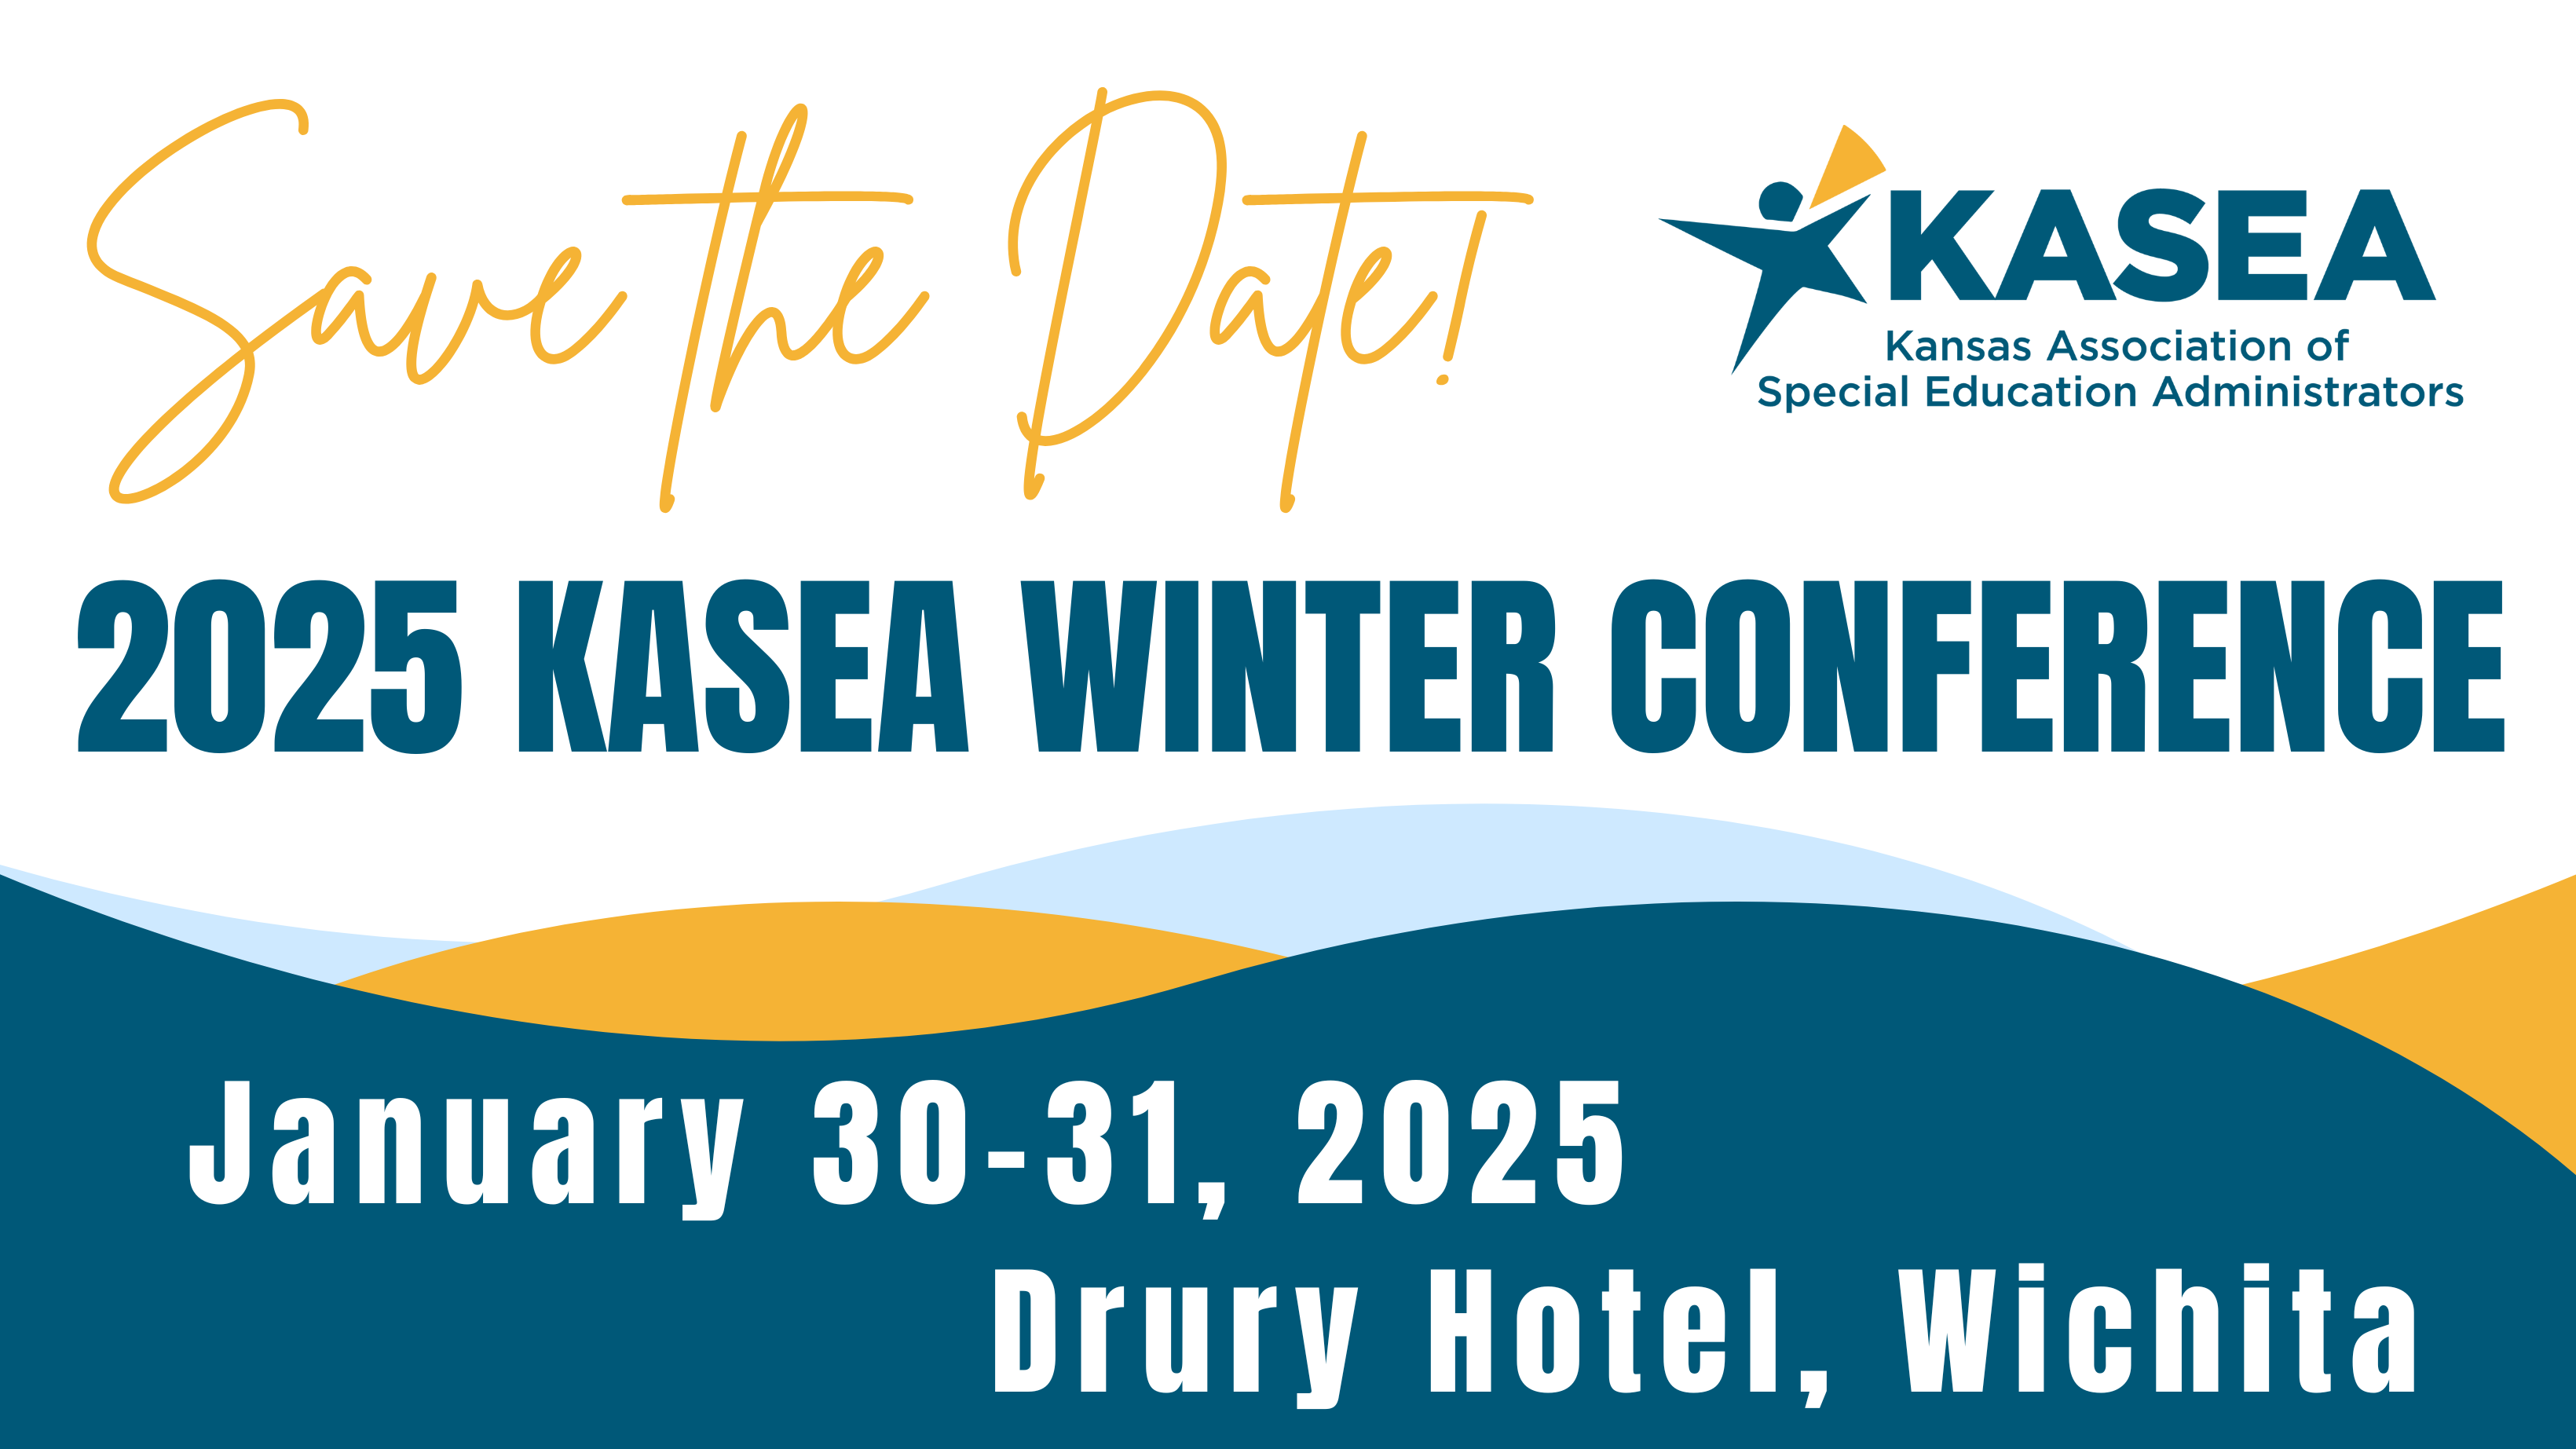 Save the Date - 2025 KASEA Winter Conference - January 30-31, 2025